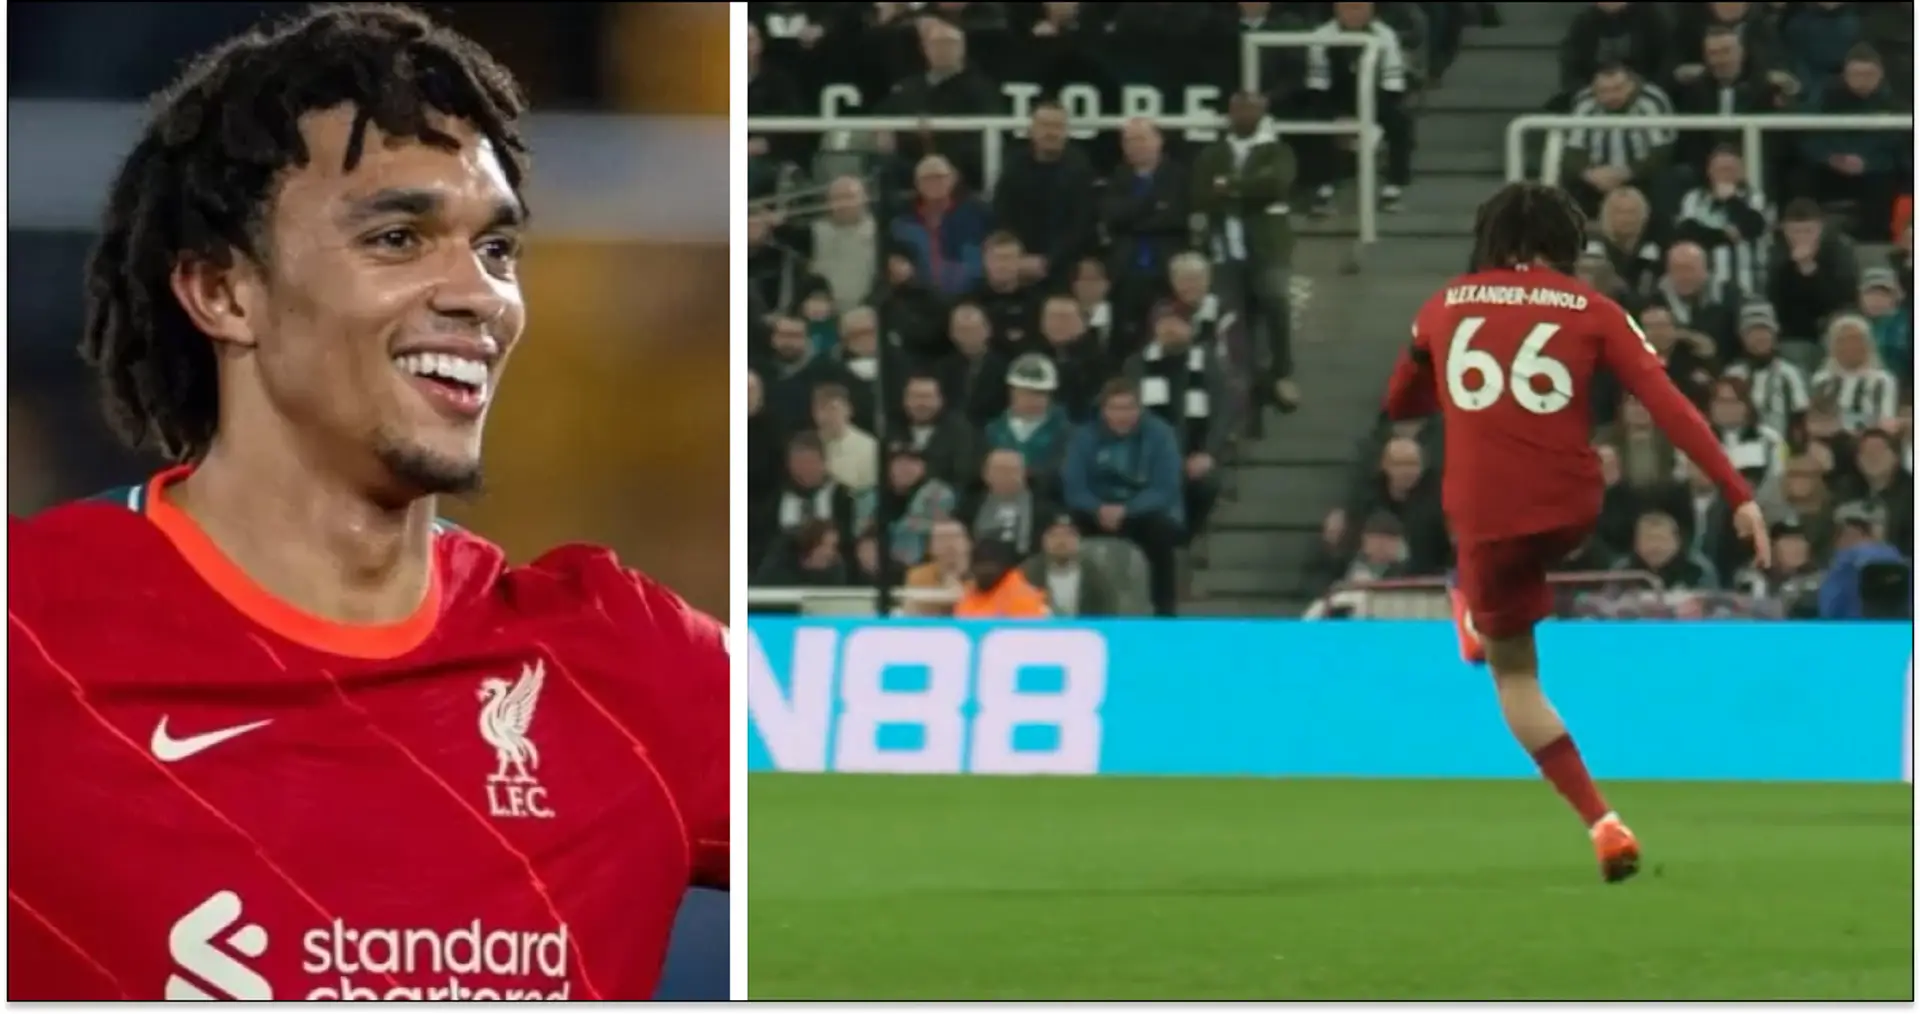 'Sees it so early, doesn't give defence a chance': Trent told he'll 'go down as one of the best passers in Prem history'